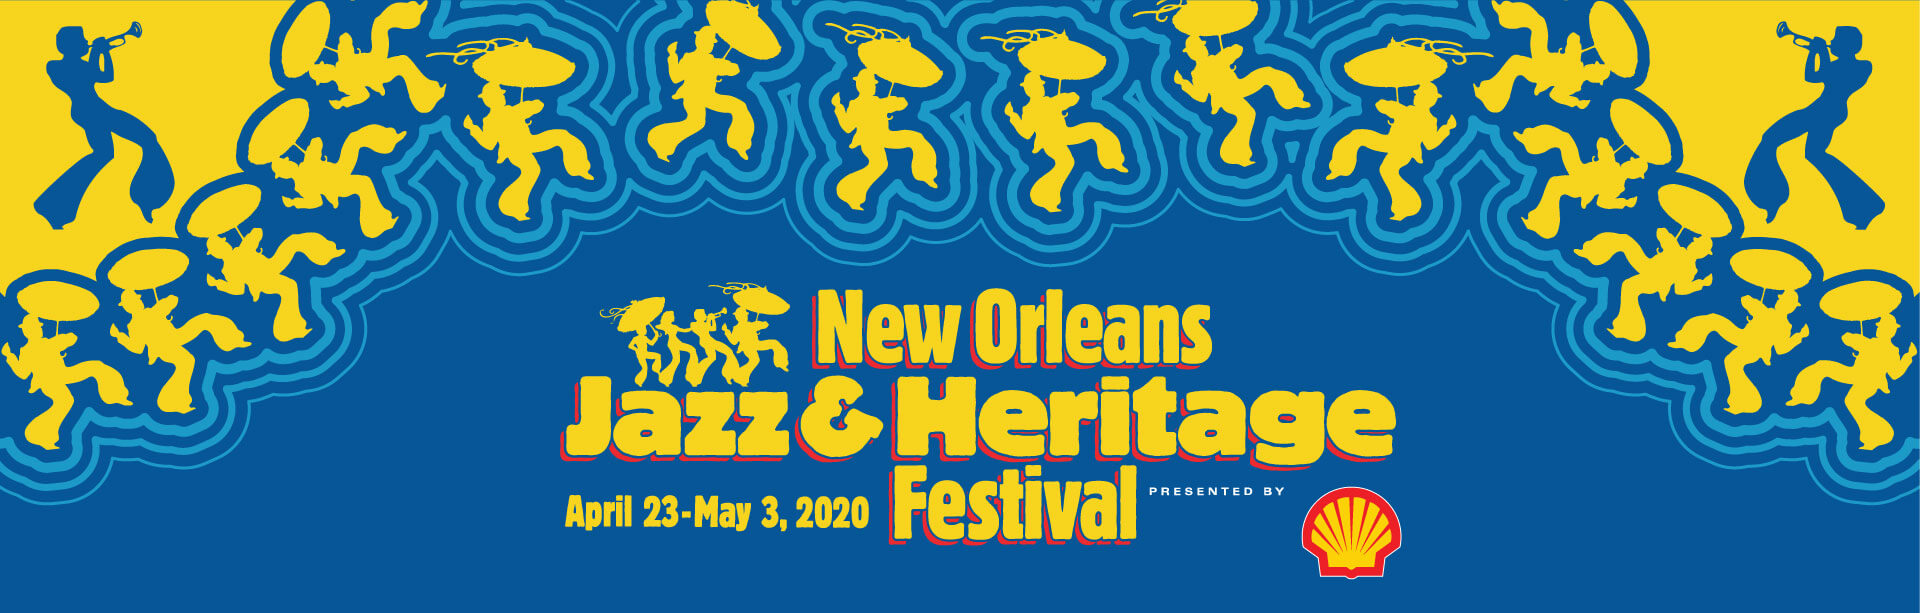 New Orleans Jazz and Heritage Festival Lineup